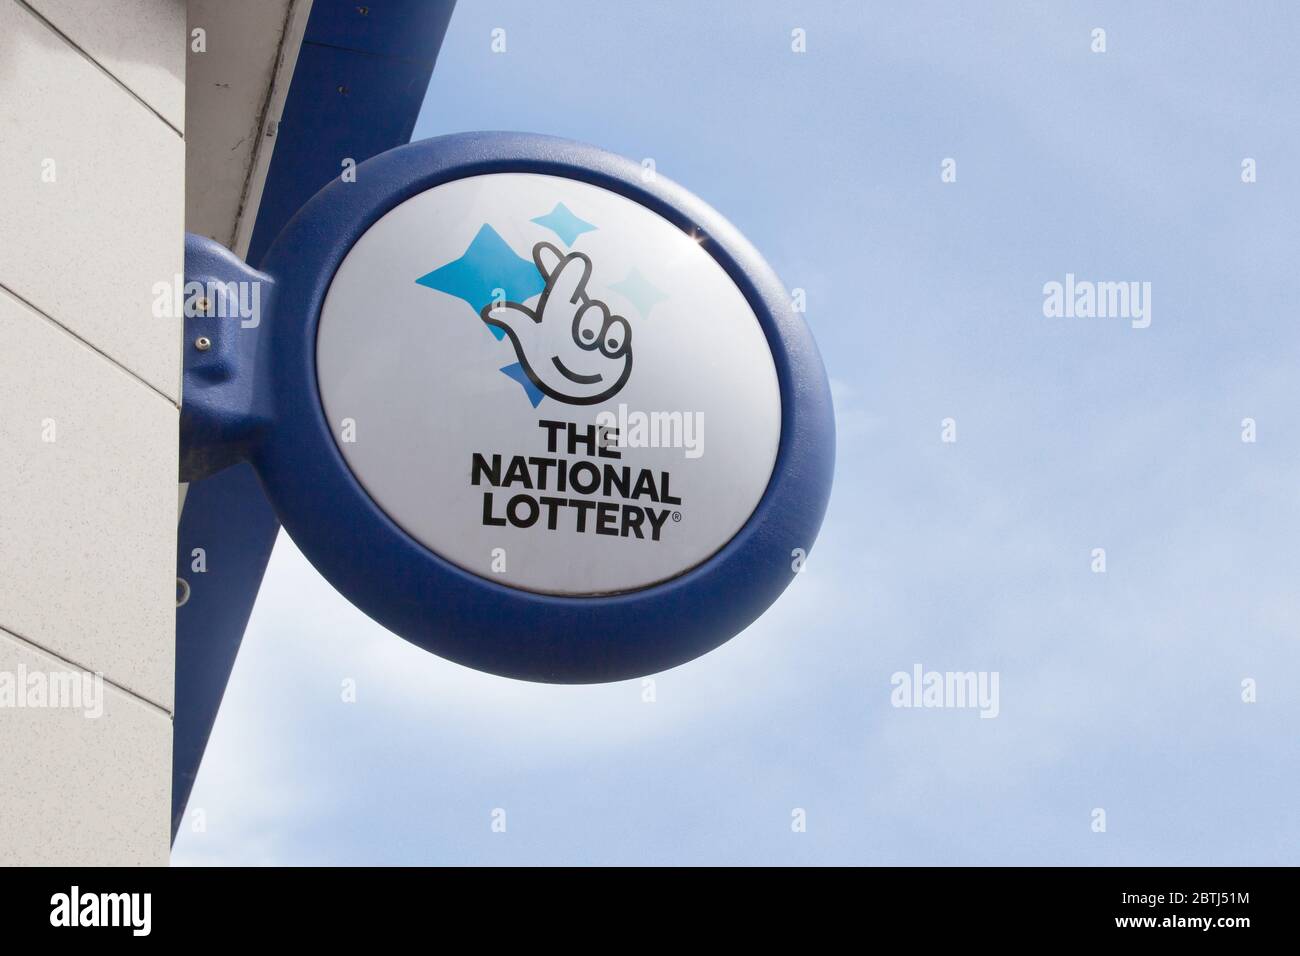 The National Lottery logo in the UK Stock Photo